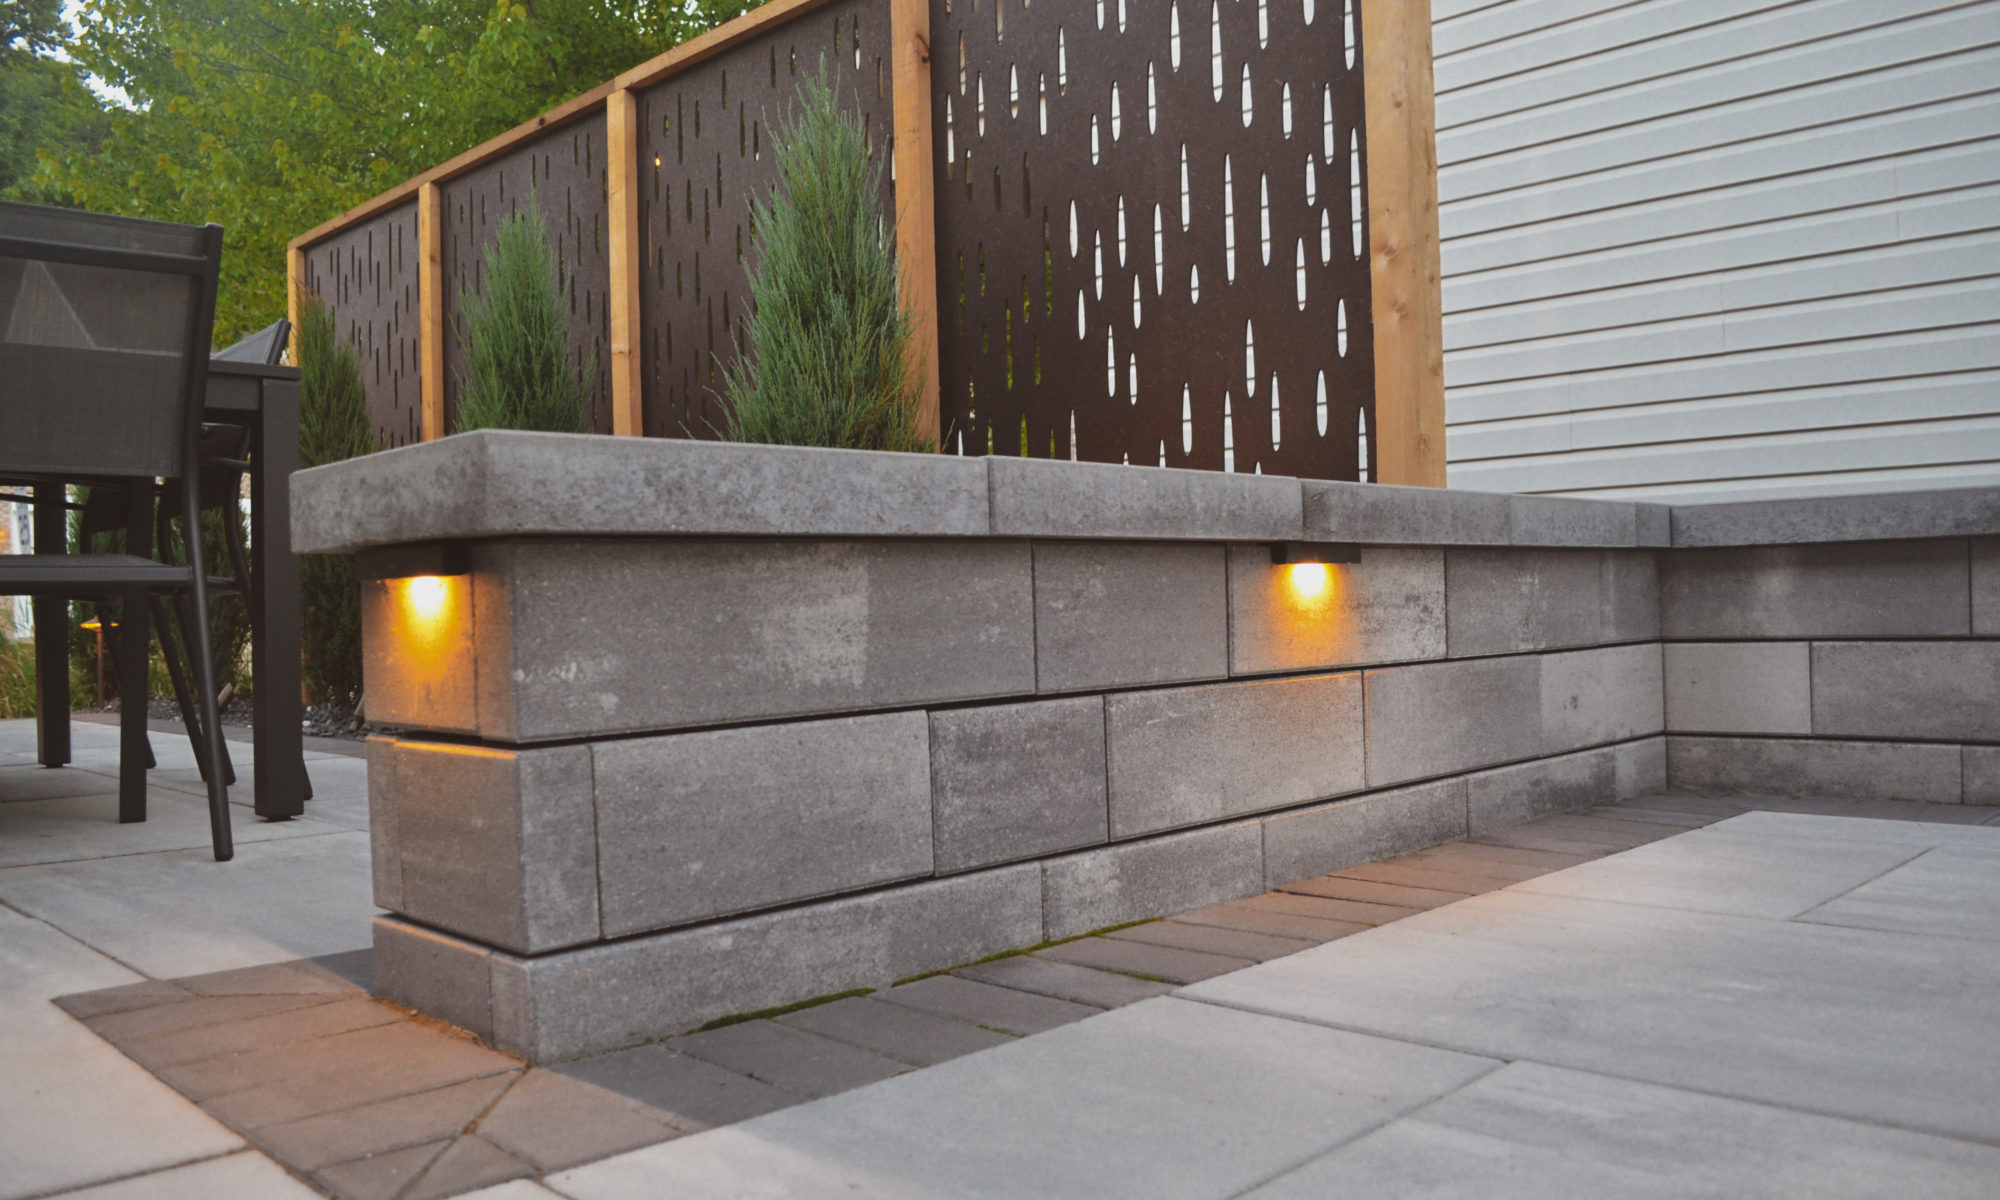 The Private Plaza privacy screens custom landscaping fire pit arborvitae private dining privacy Carmel indiana landscaping walkway Night Lighting